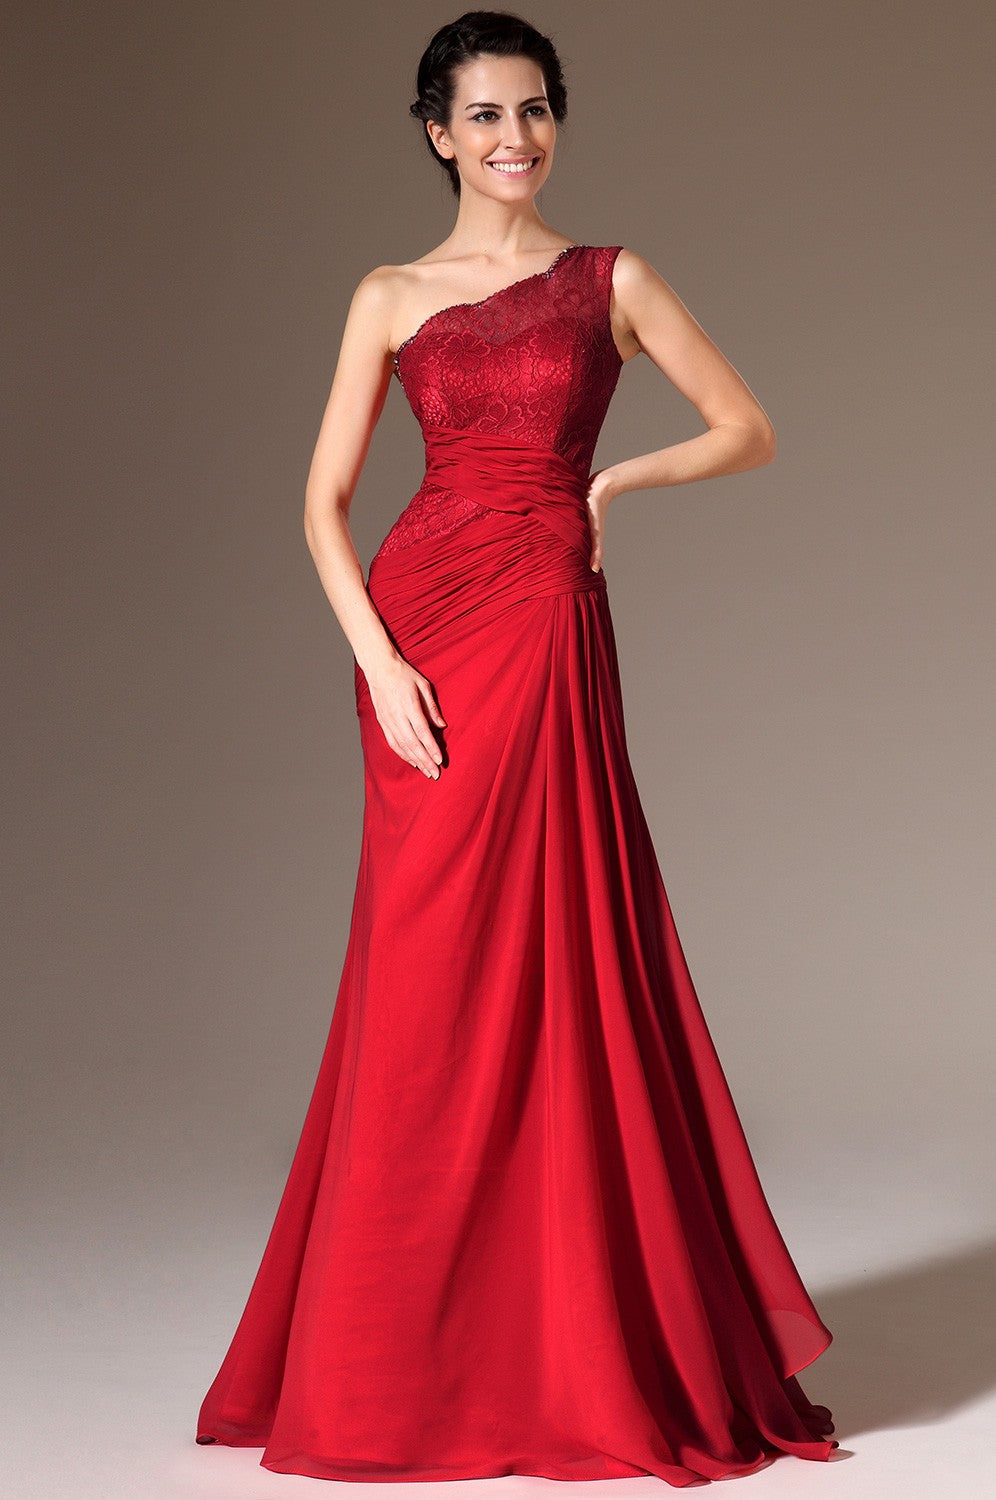 Red Chiffon And lace Trumpet/Mermaid One Shoulder Bridesmaid Formal Dress(BDJT1350)